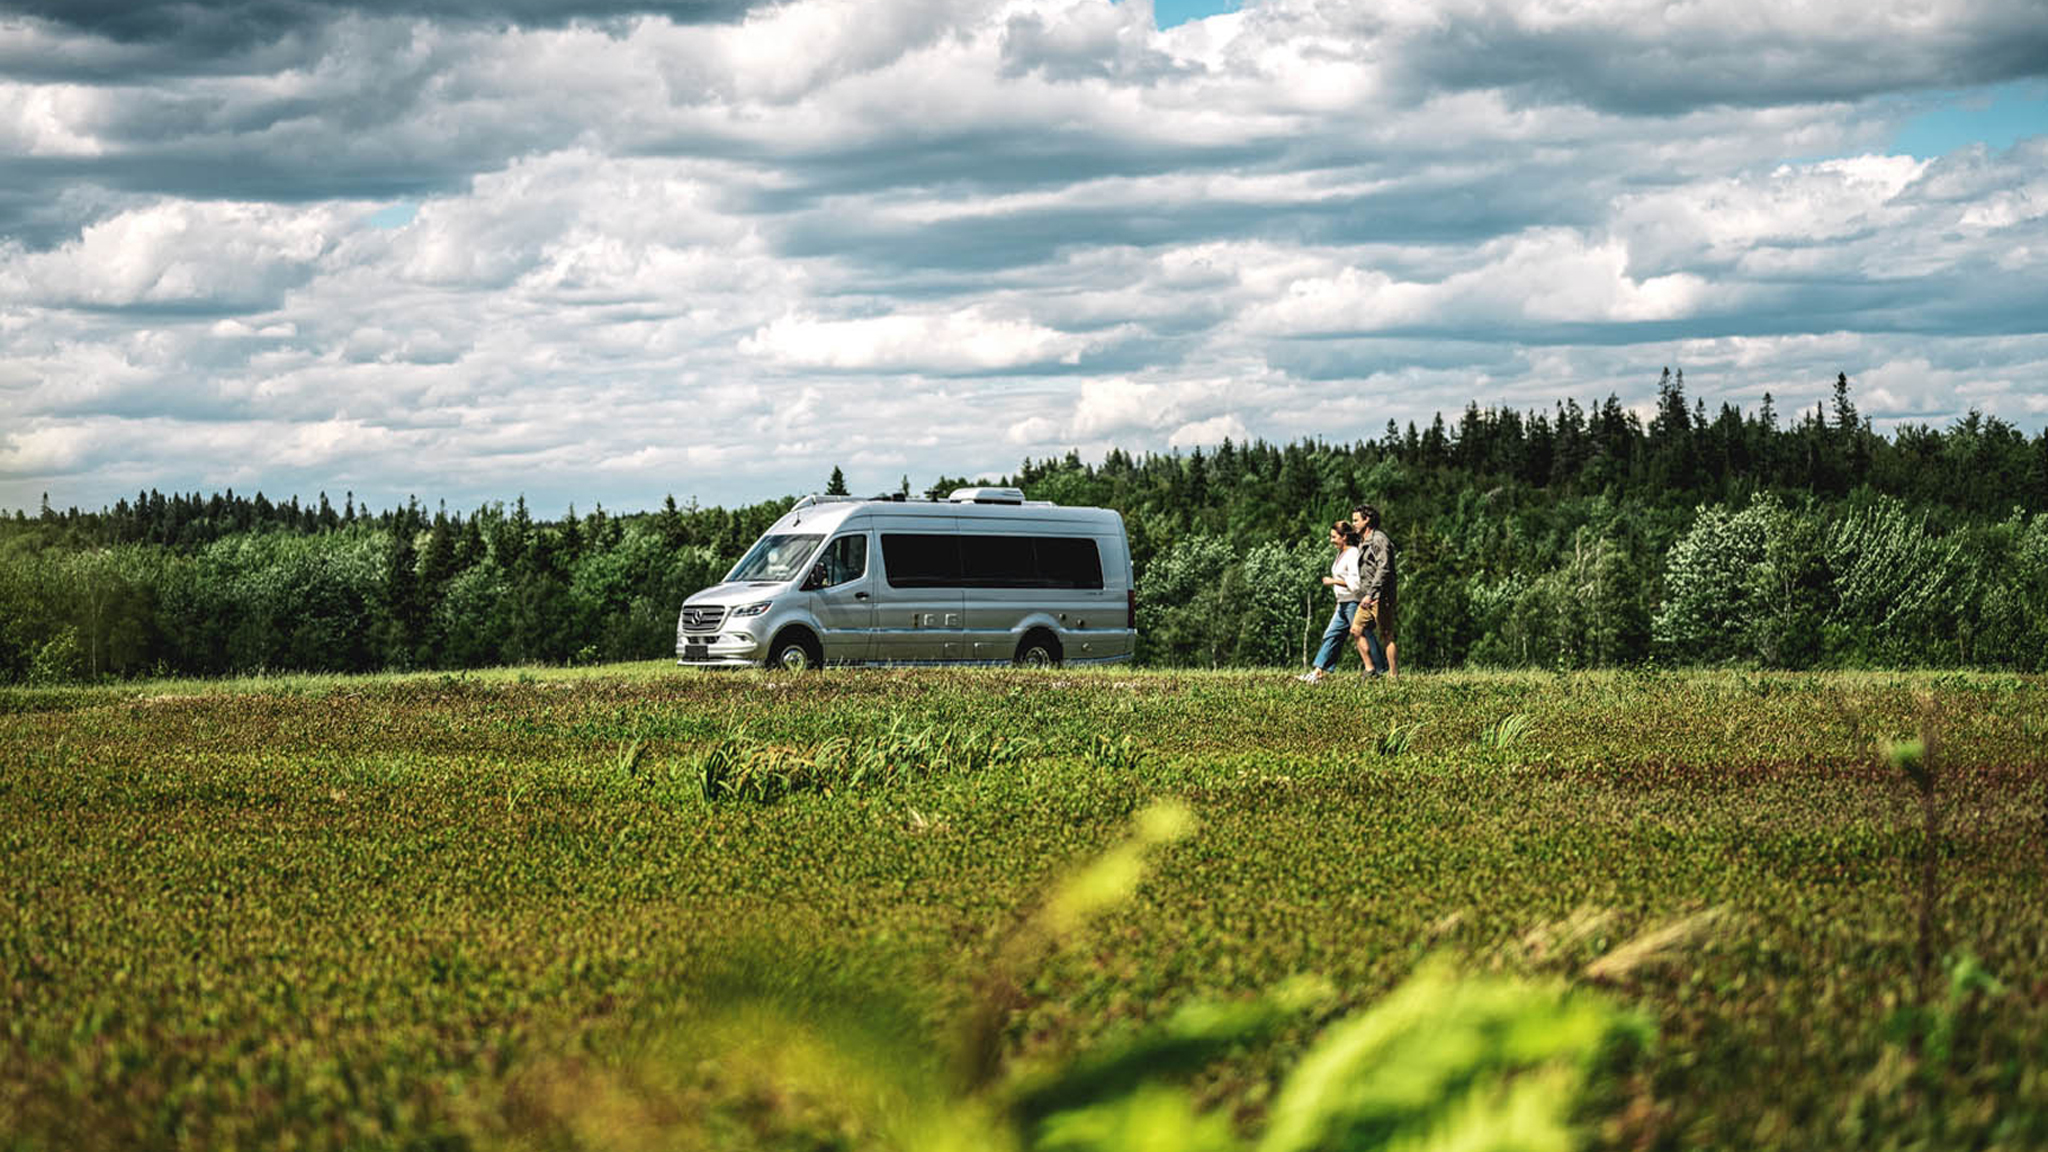 Airstream Interstate Touring Coach parked in a field with a couple walking outside.